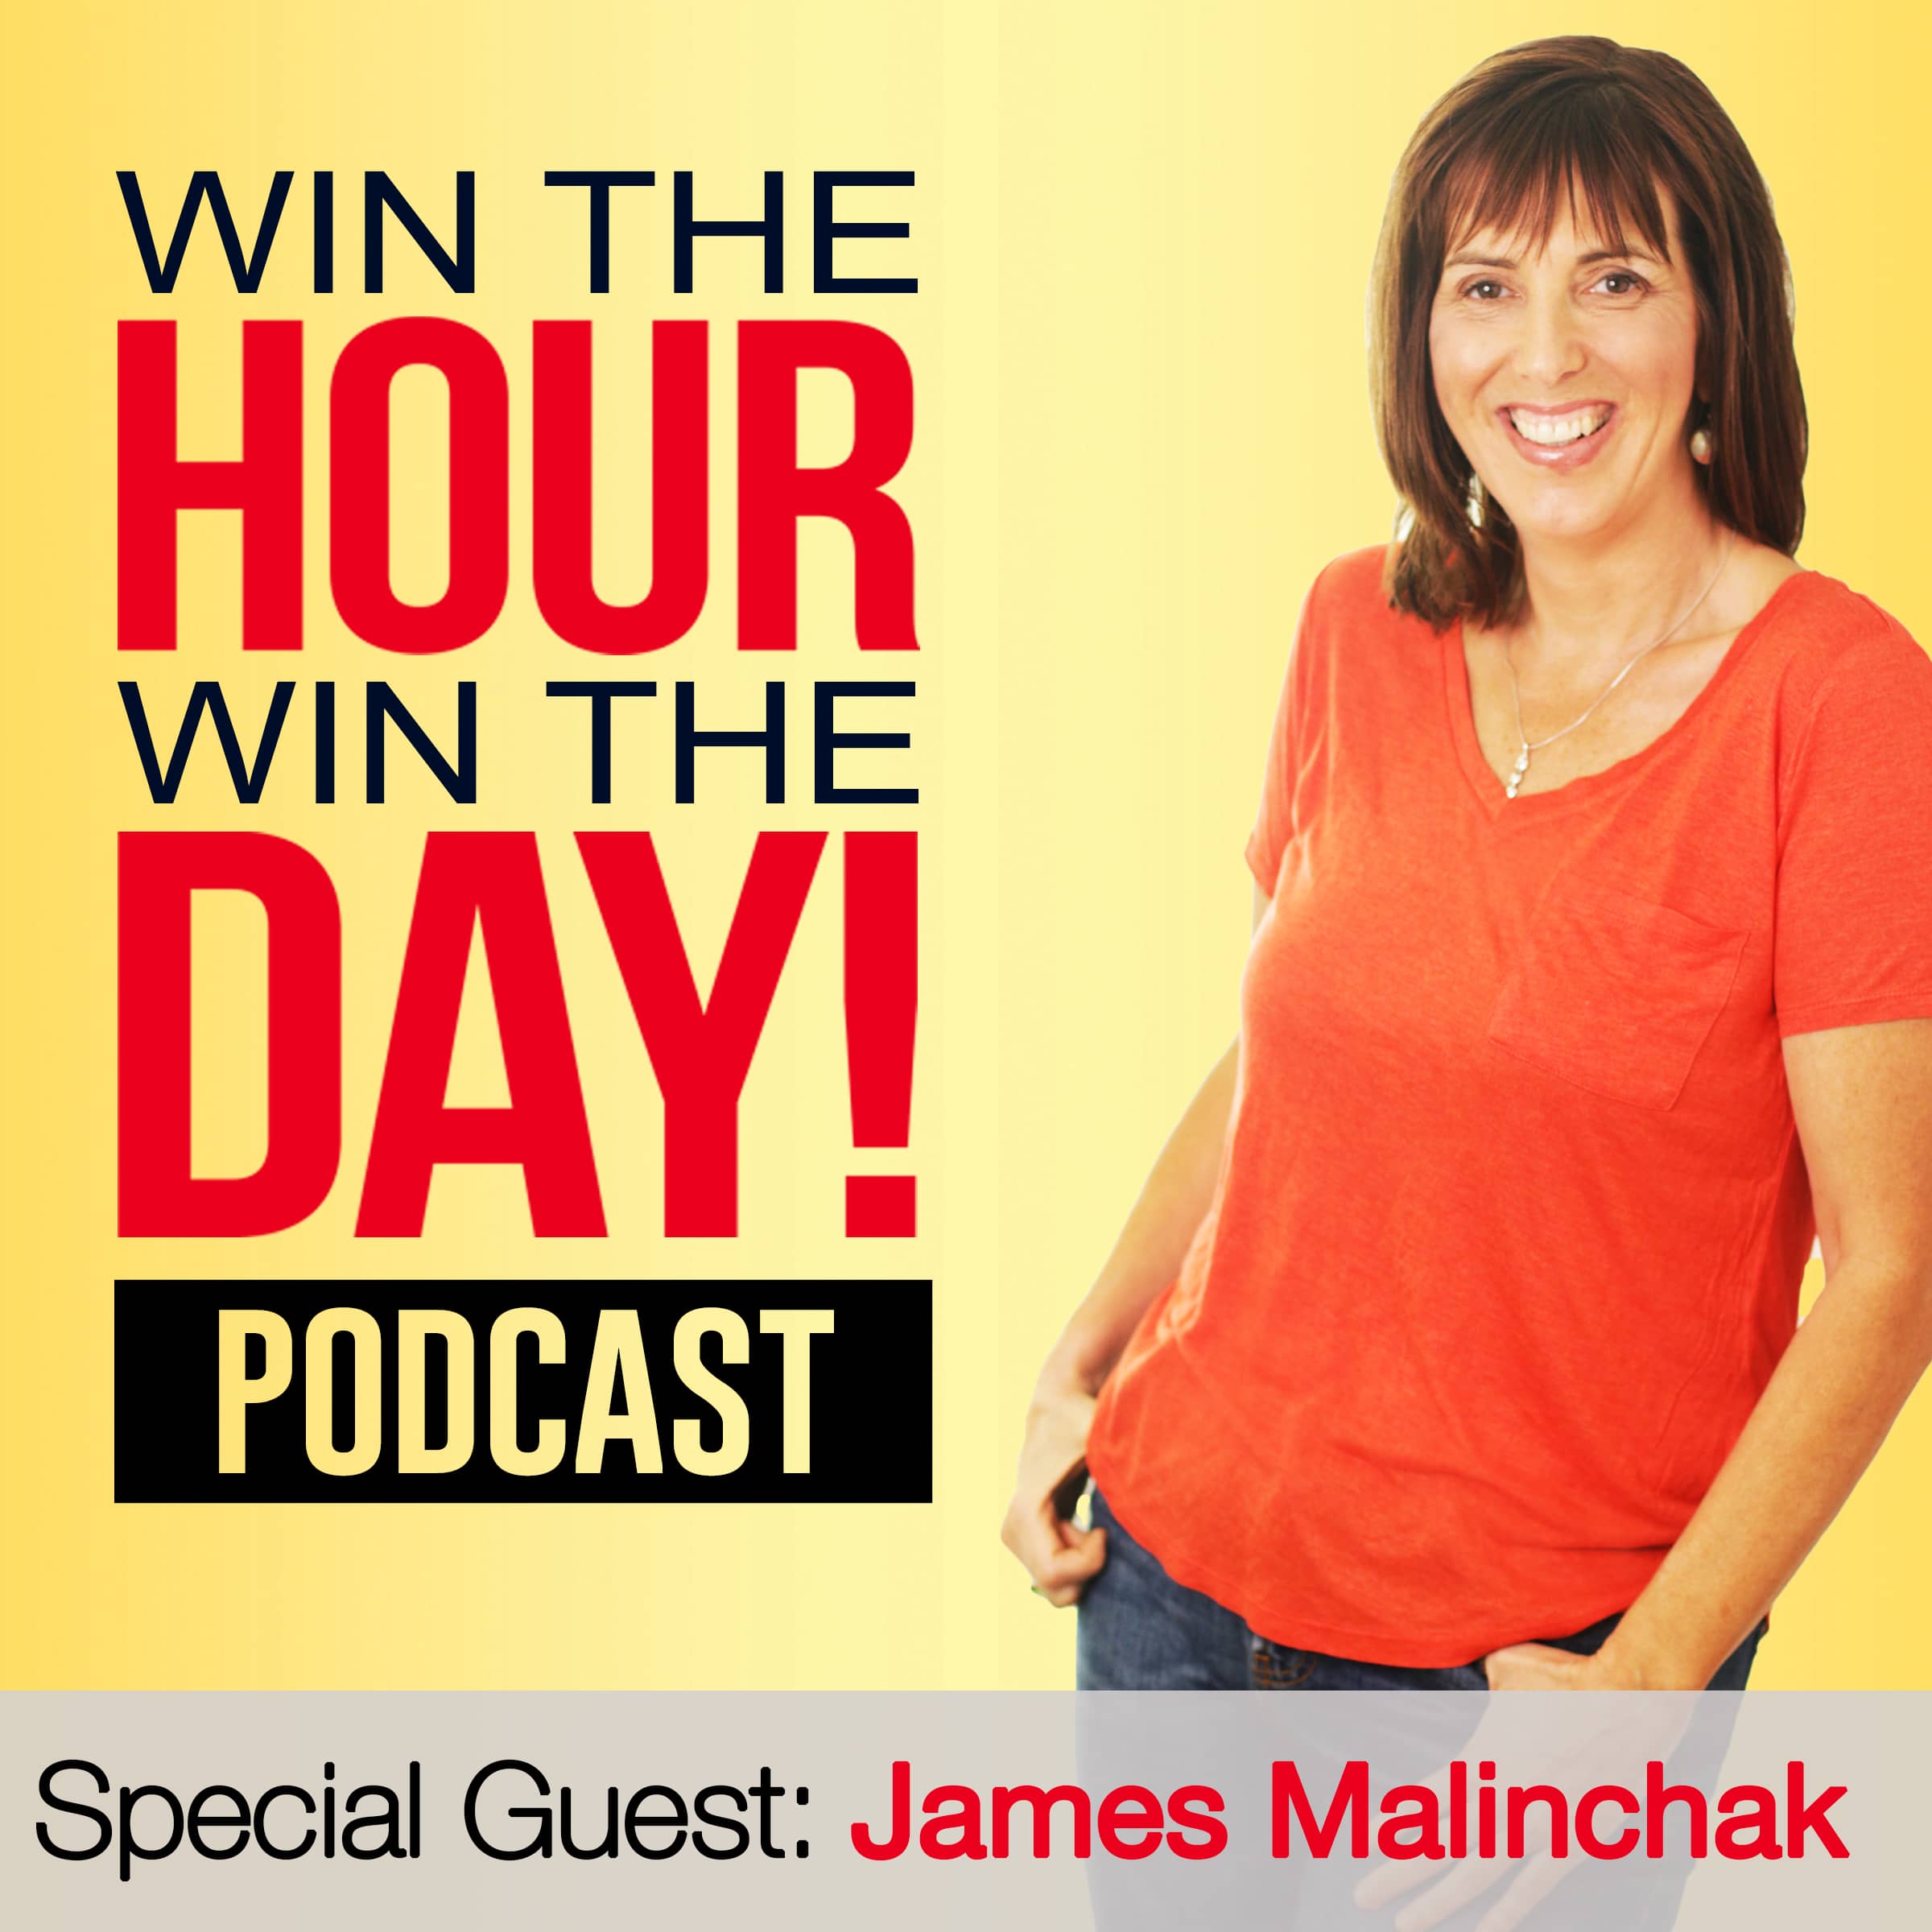 How To Become A Big Money Speaker! With James Malinchak